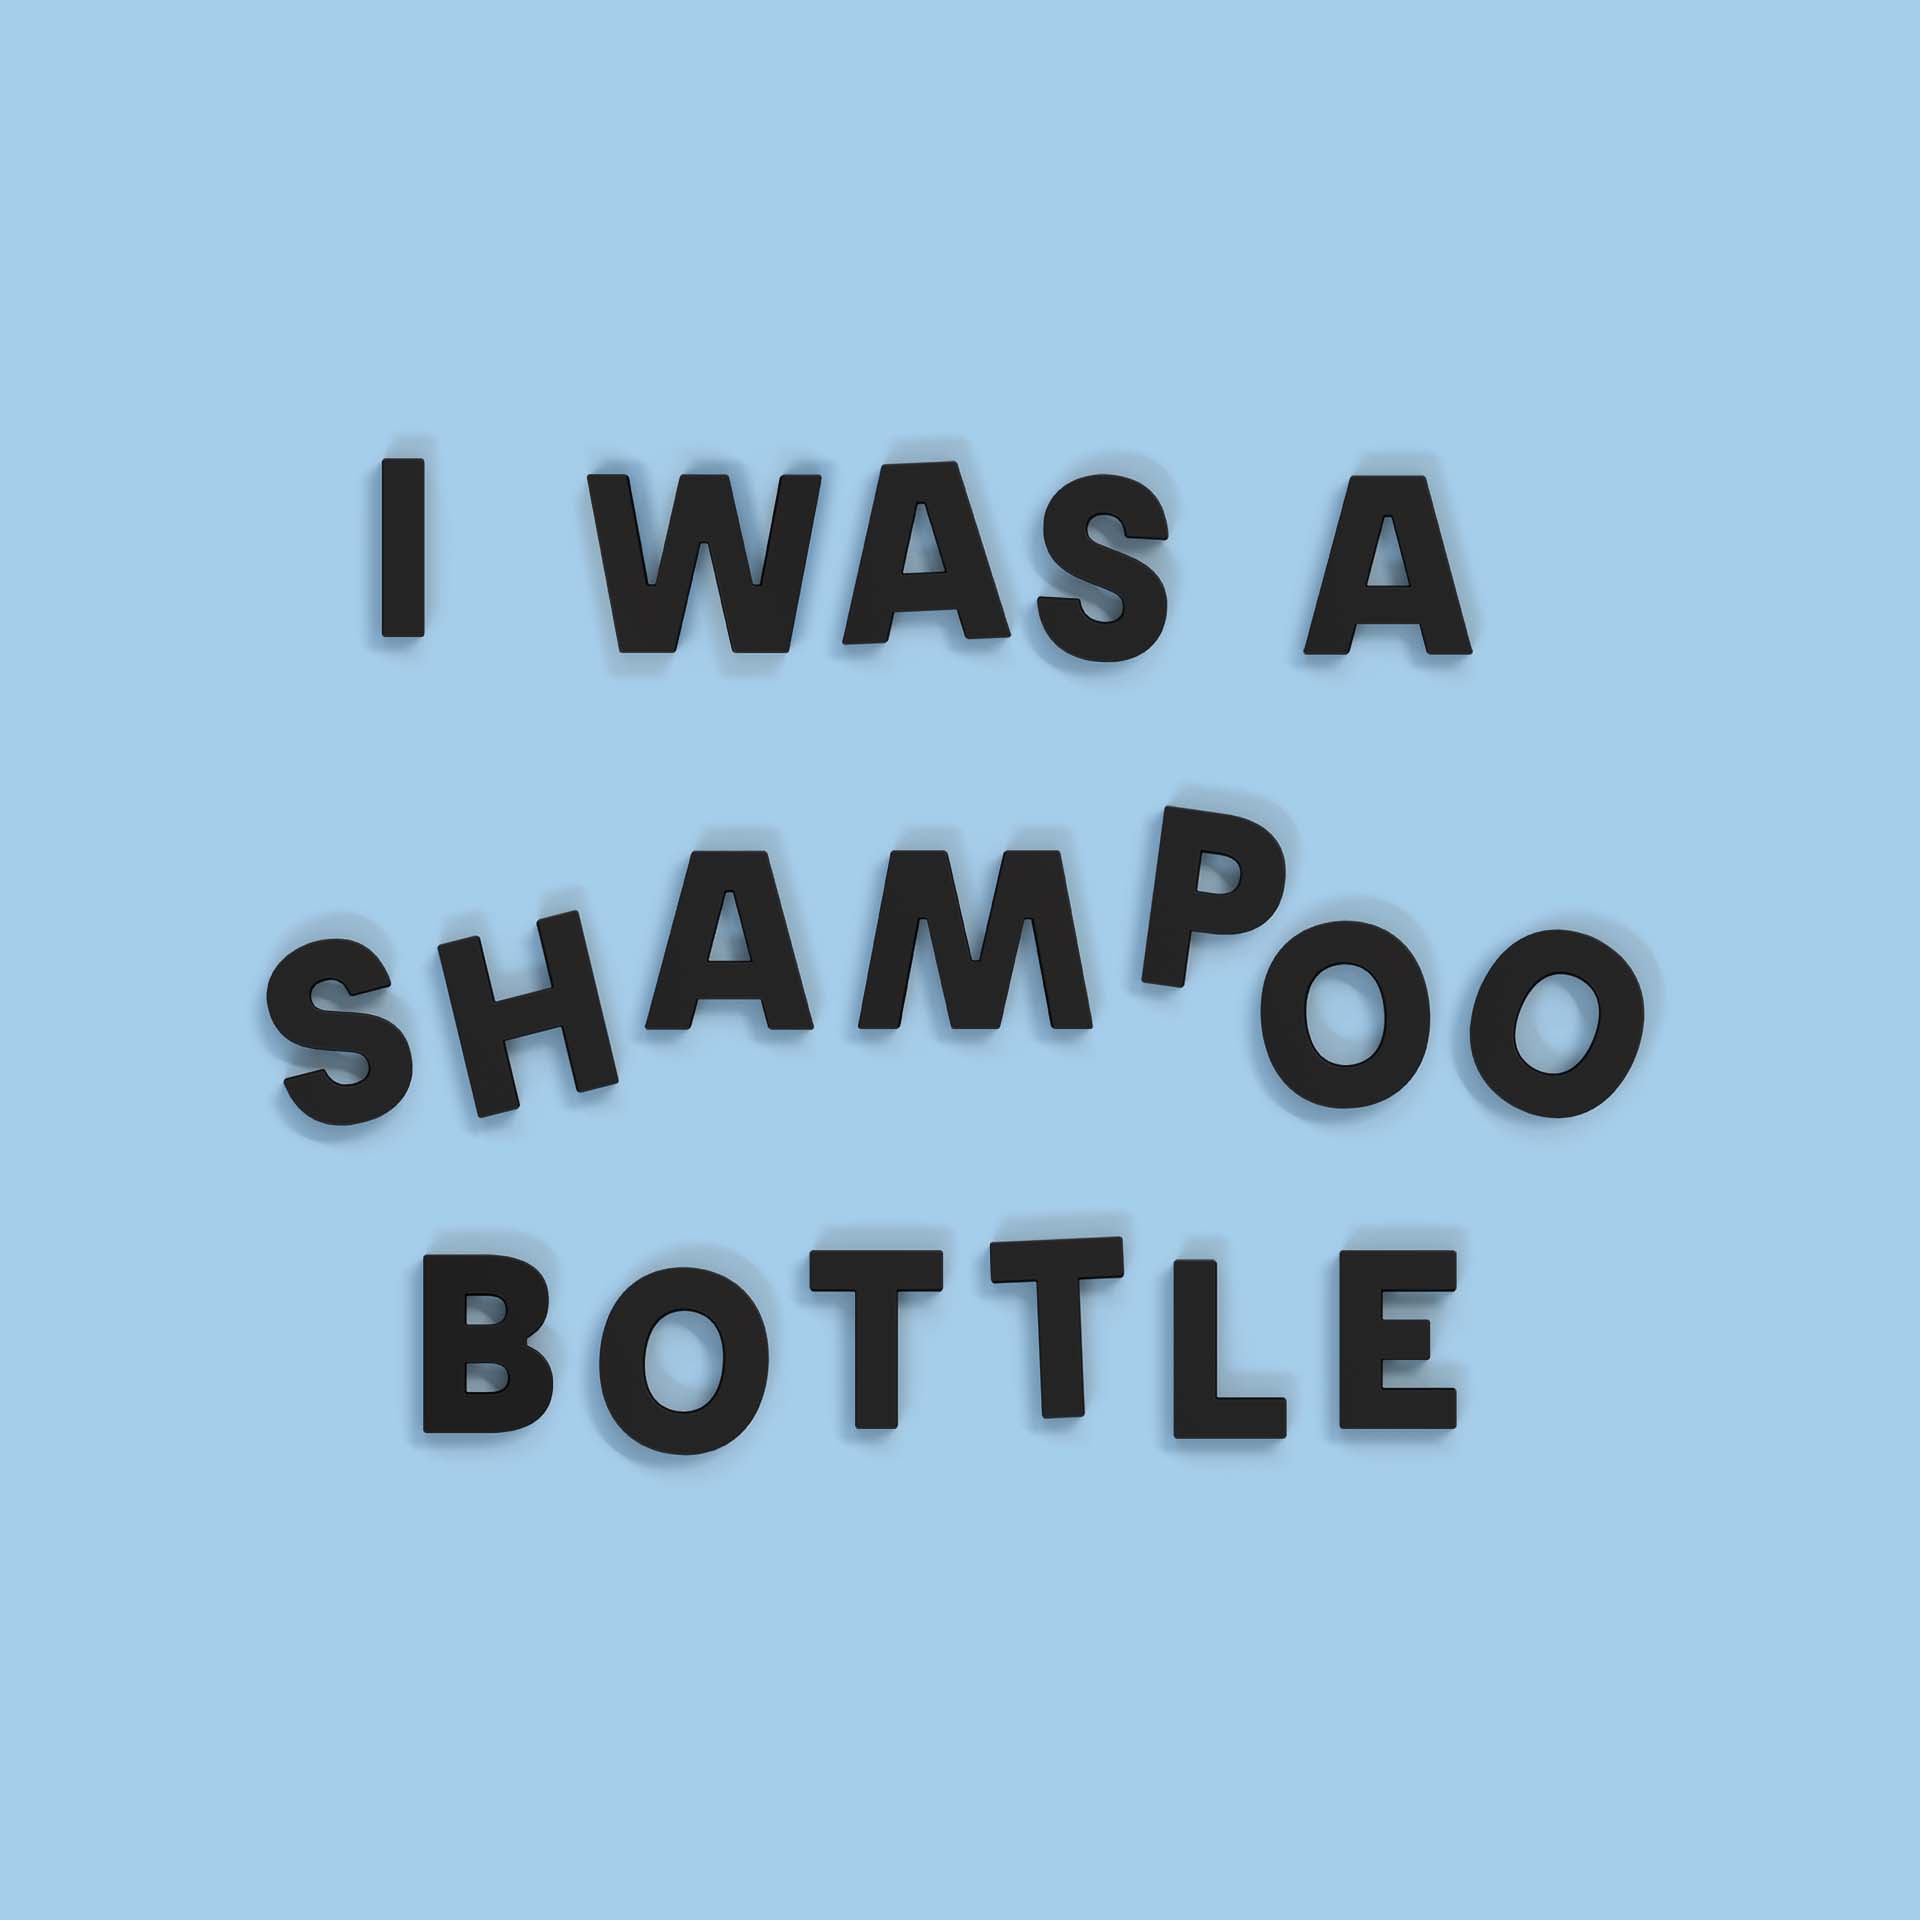 Black Wordbits letters spelling "I was a shampoo bottle" to promote the fact Wordbits are made from post-consumer recycled plastic